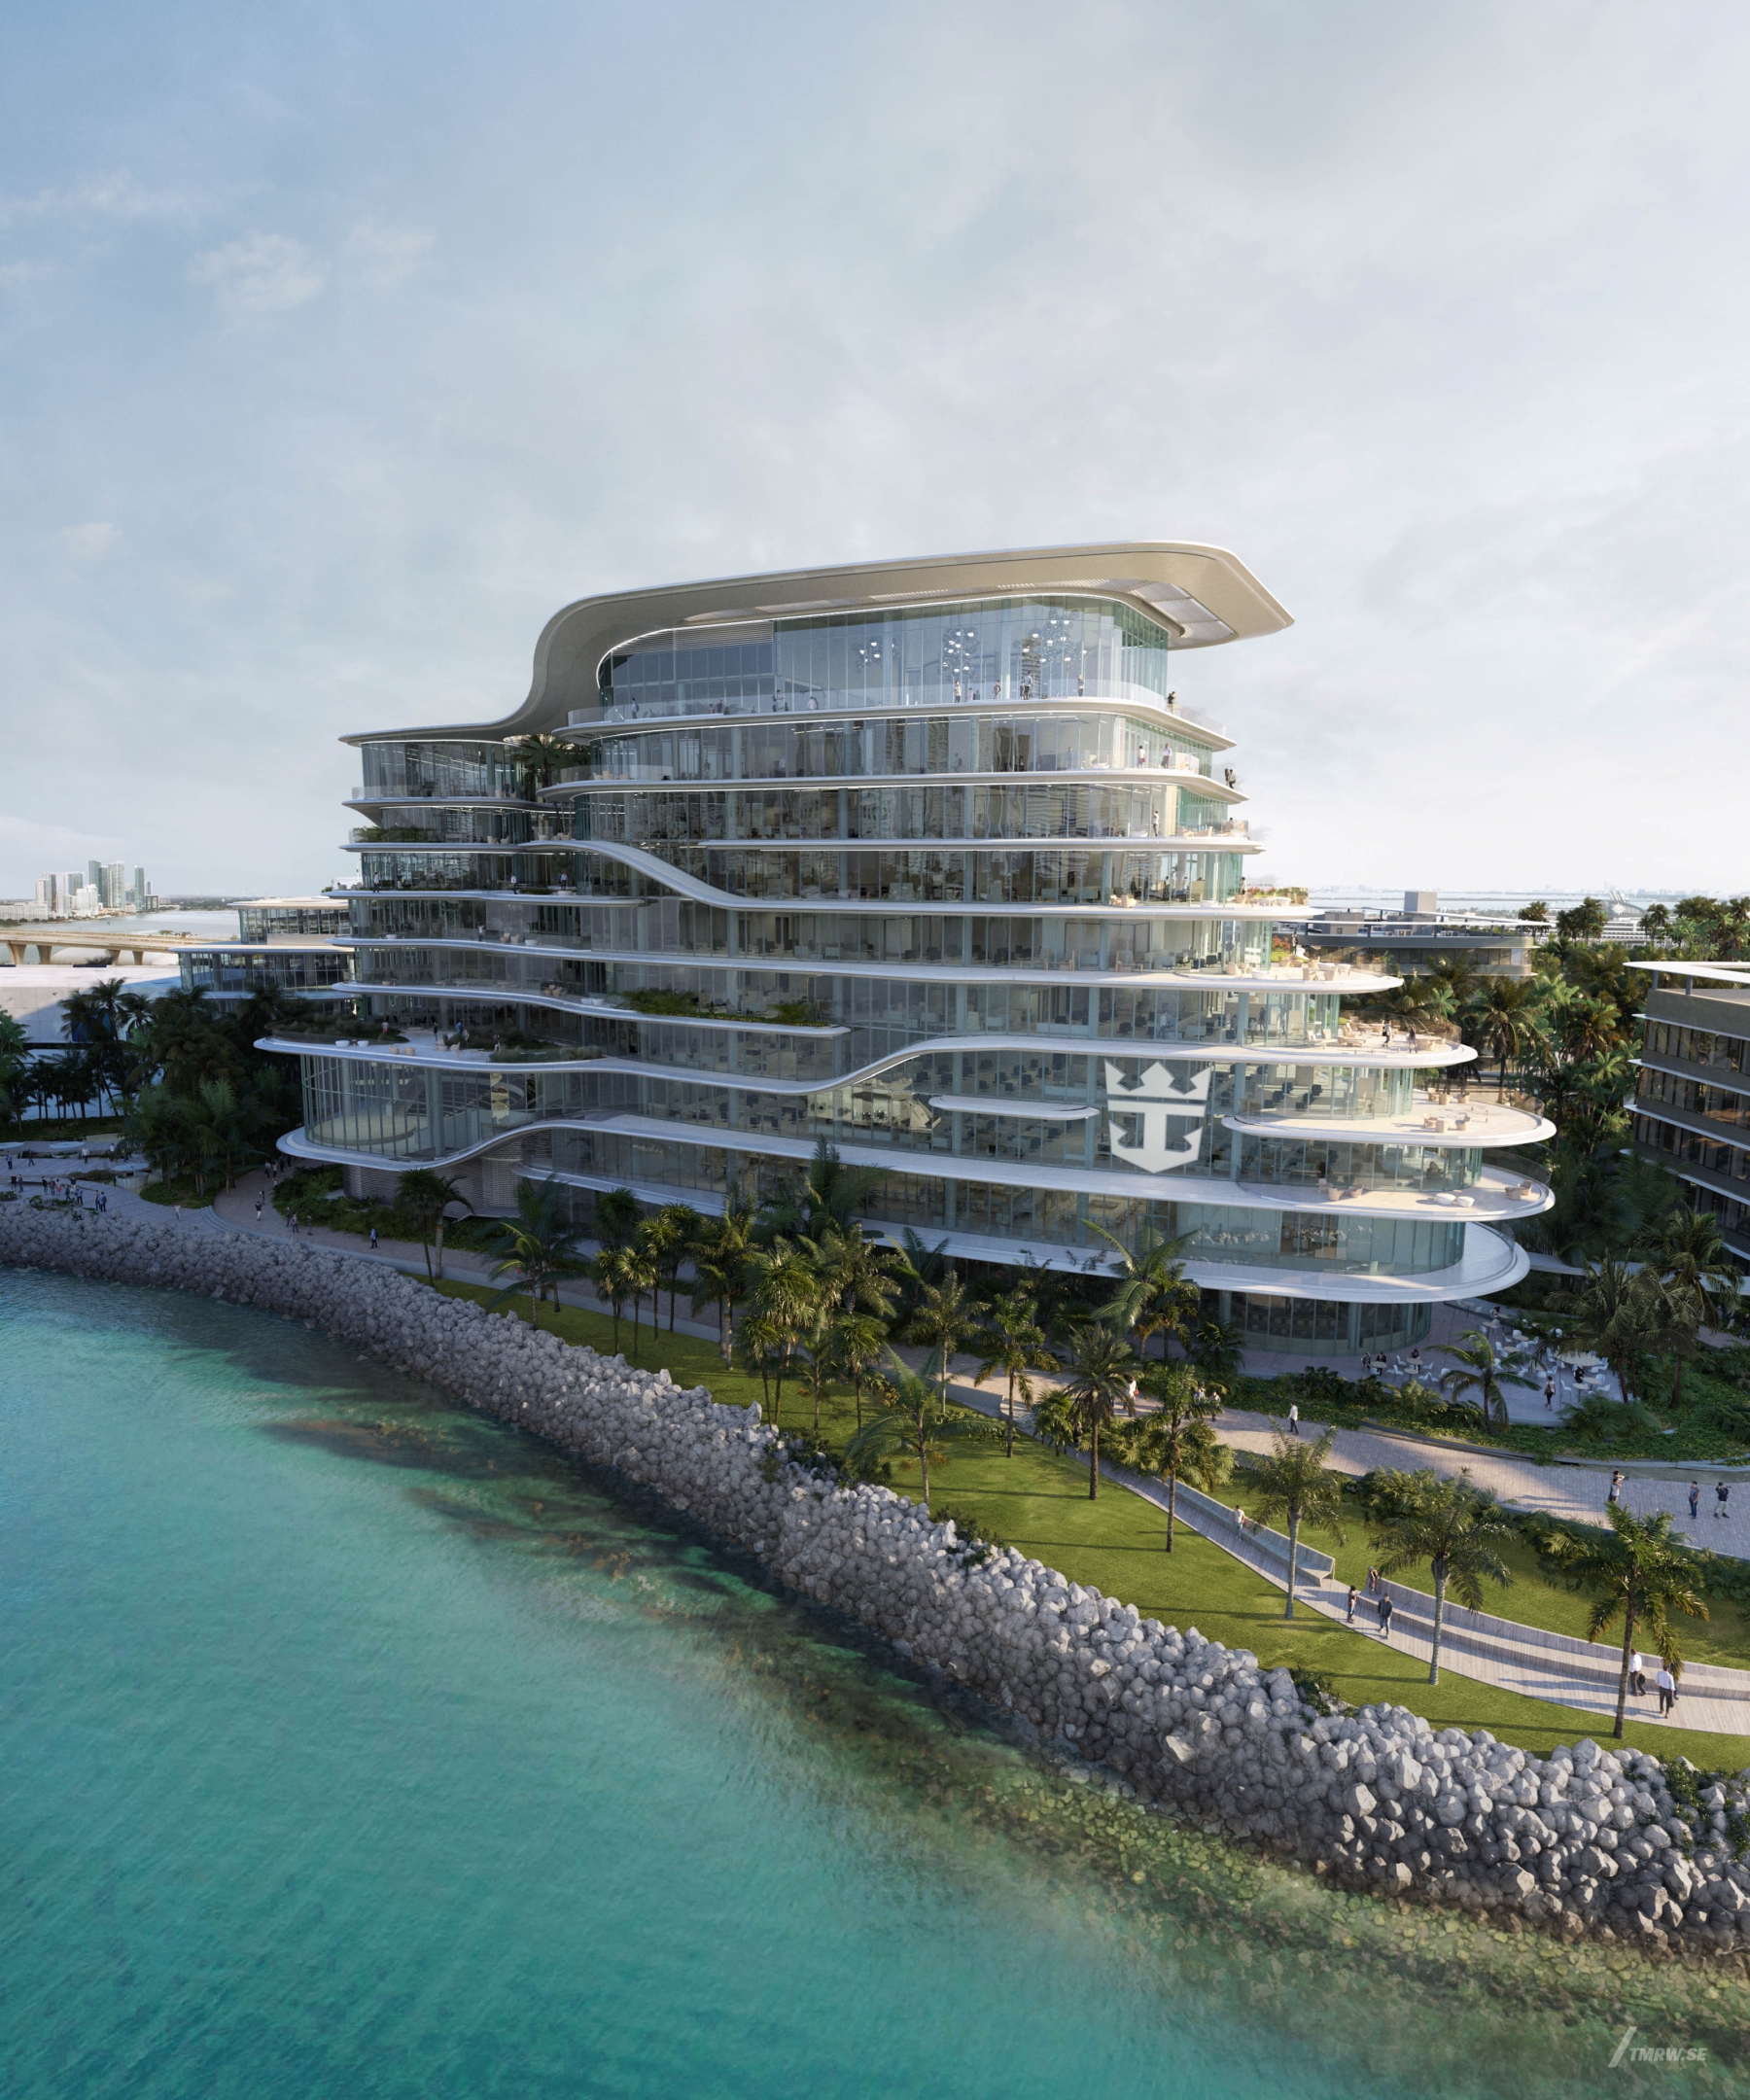 Architectural visualization of Royal Caribbean for HOK, an office building during day light from an semi aerial view.